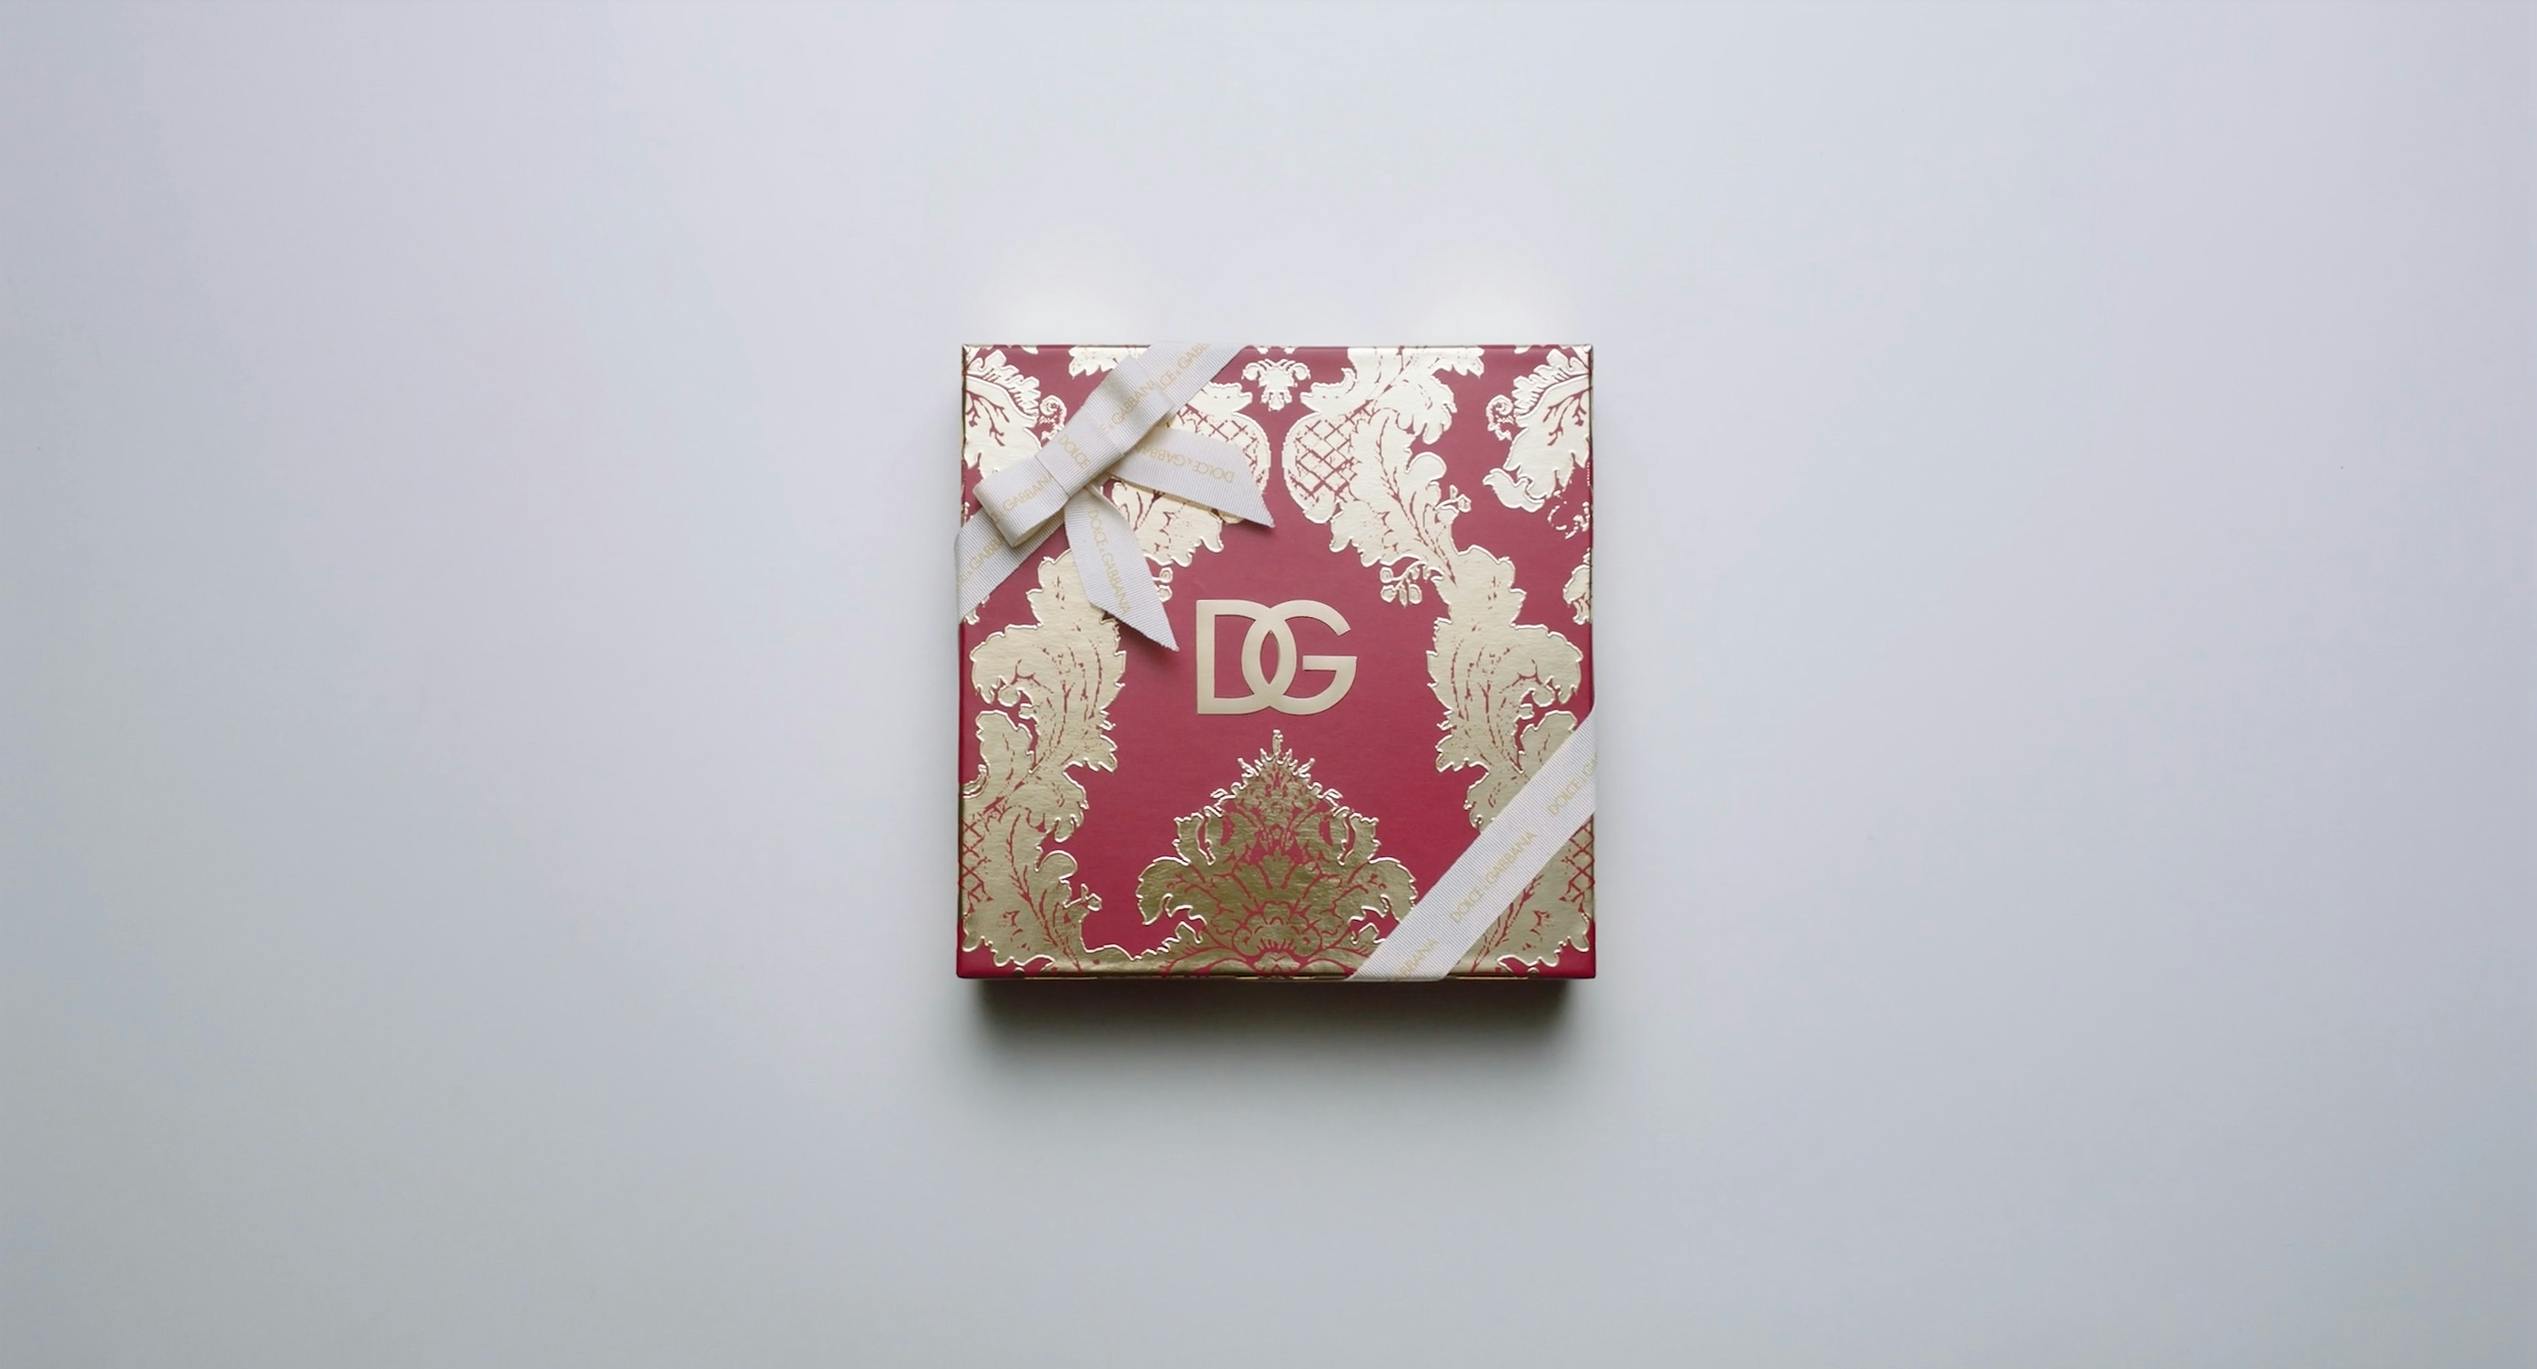 D&G Beauty_"Art of Gifting" by her